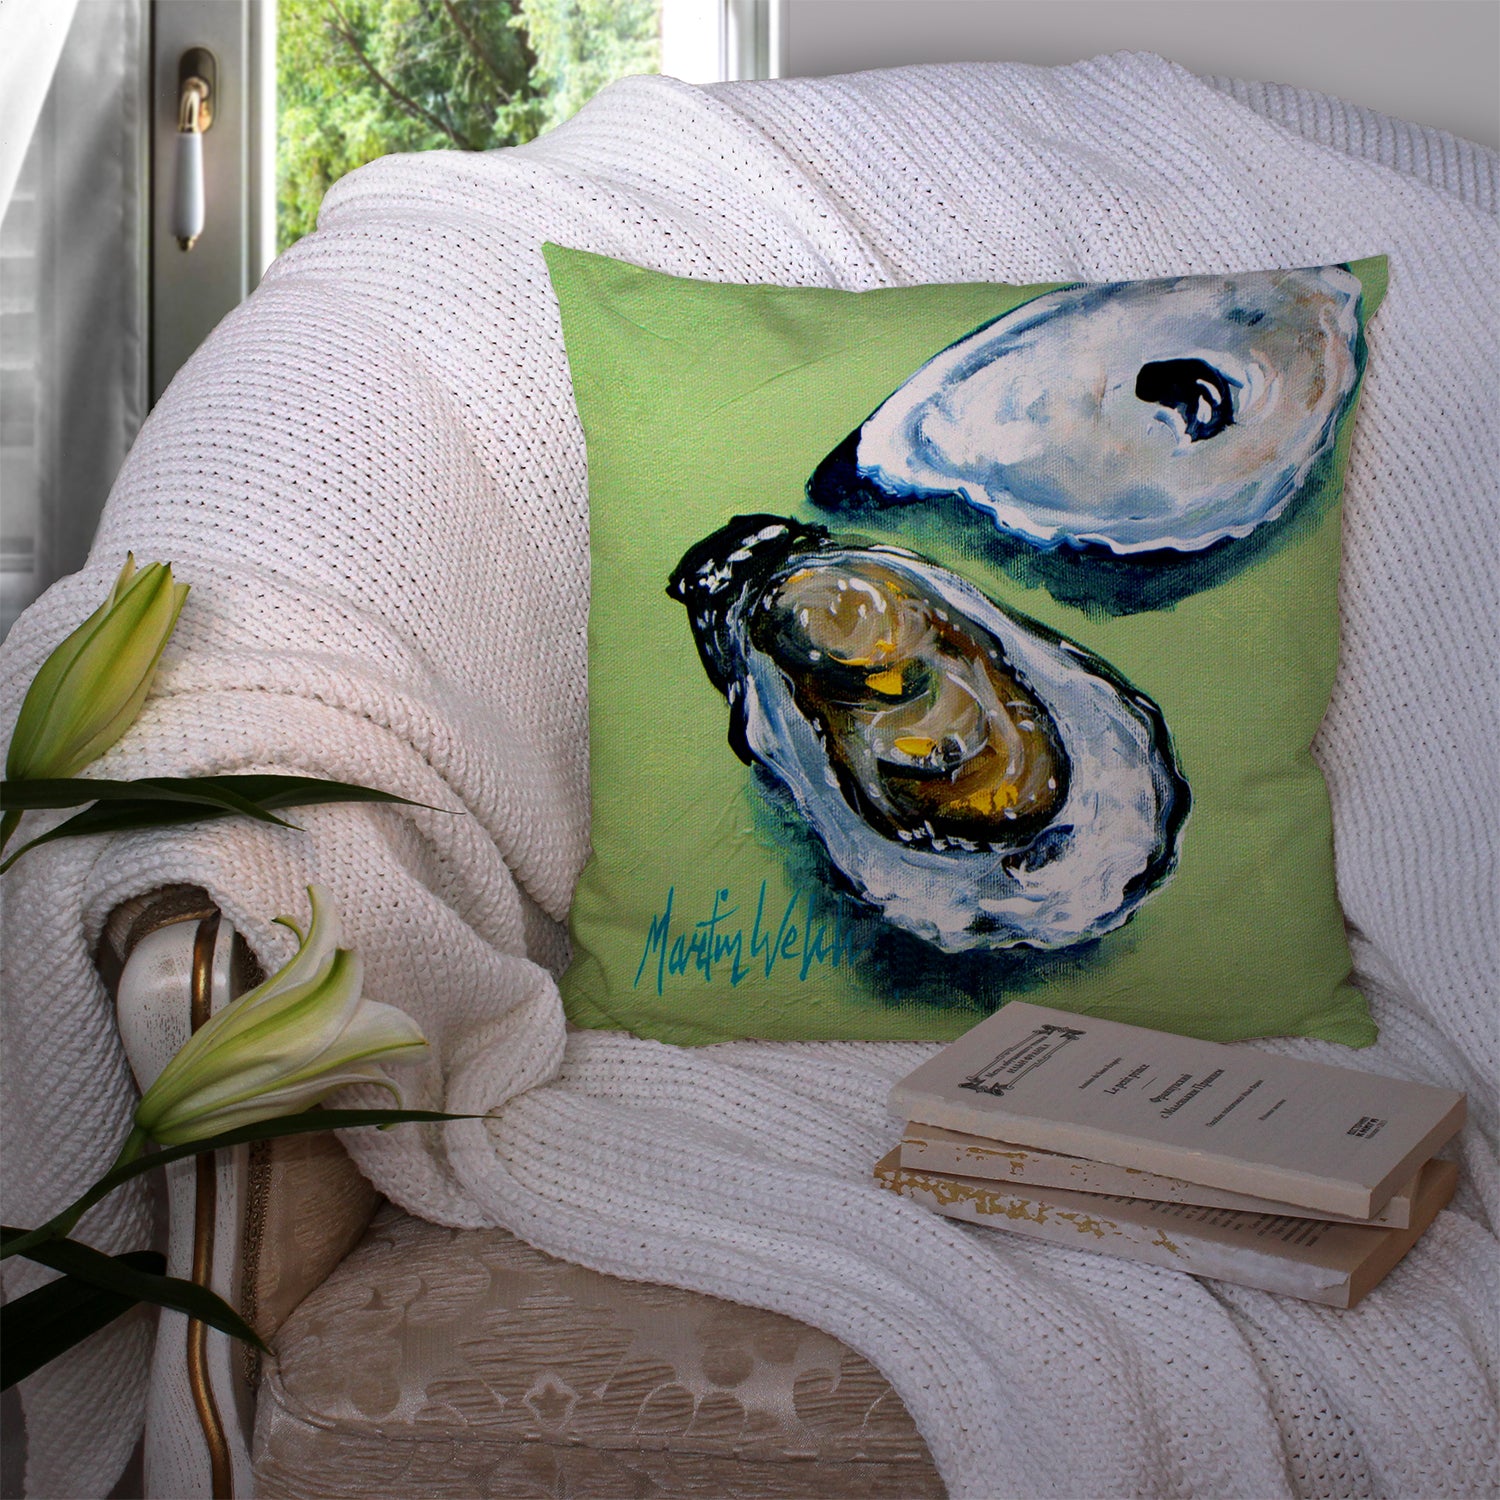 Two Shells Oyster Fabric Decorative Pillow MW1361PW1414 - the-store.com